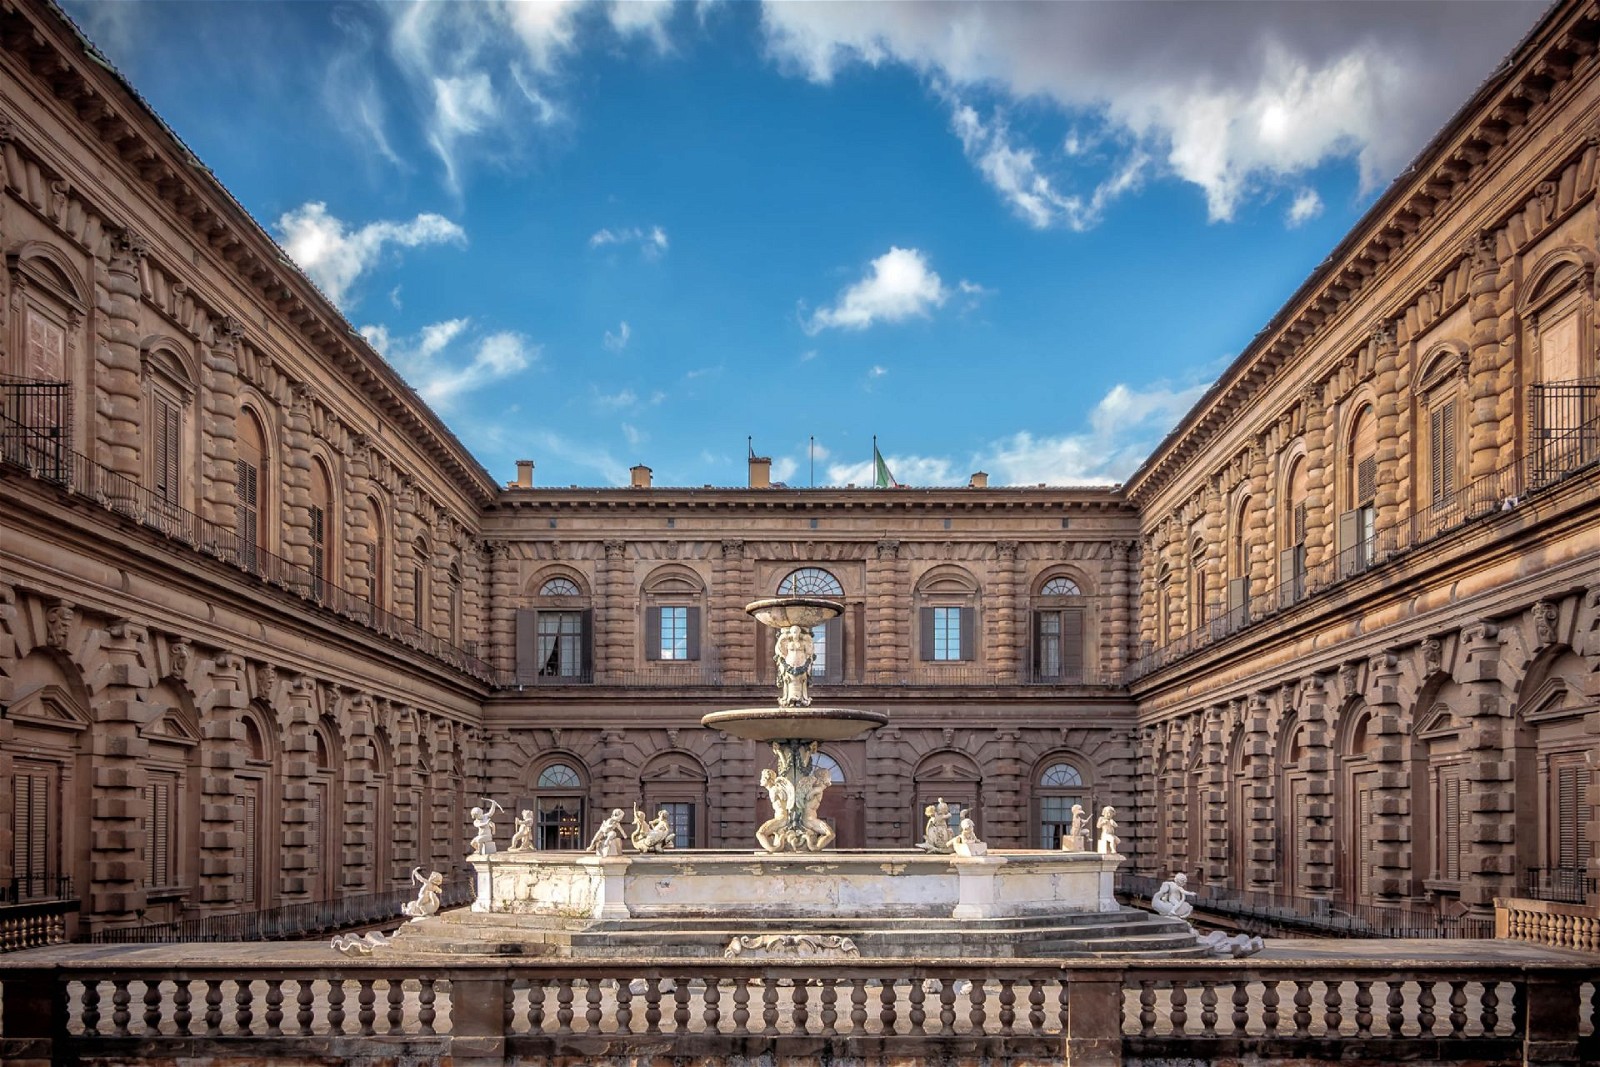 Palazzo Pitti: The Palazzo Pitti is one of the most famous palaces in Florence and is home to many important museums and galleries.